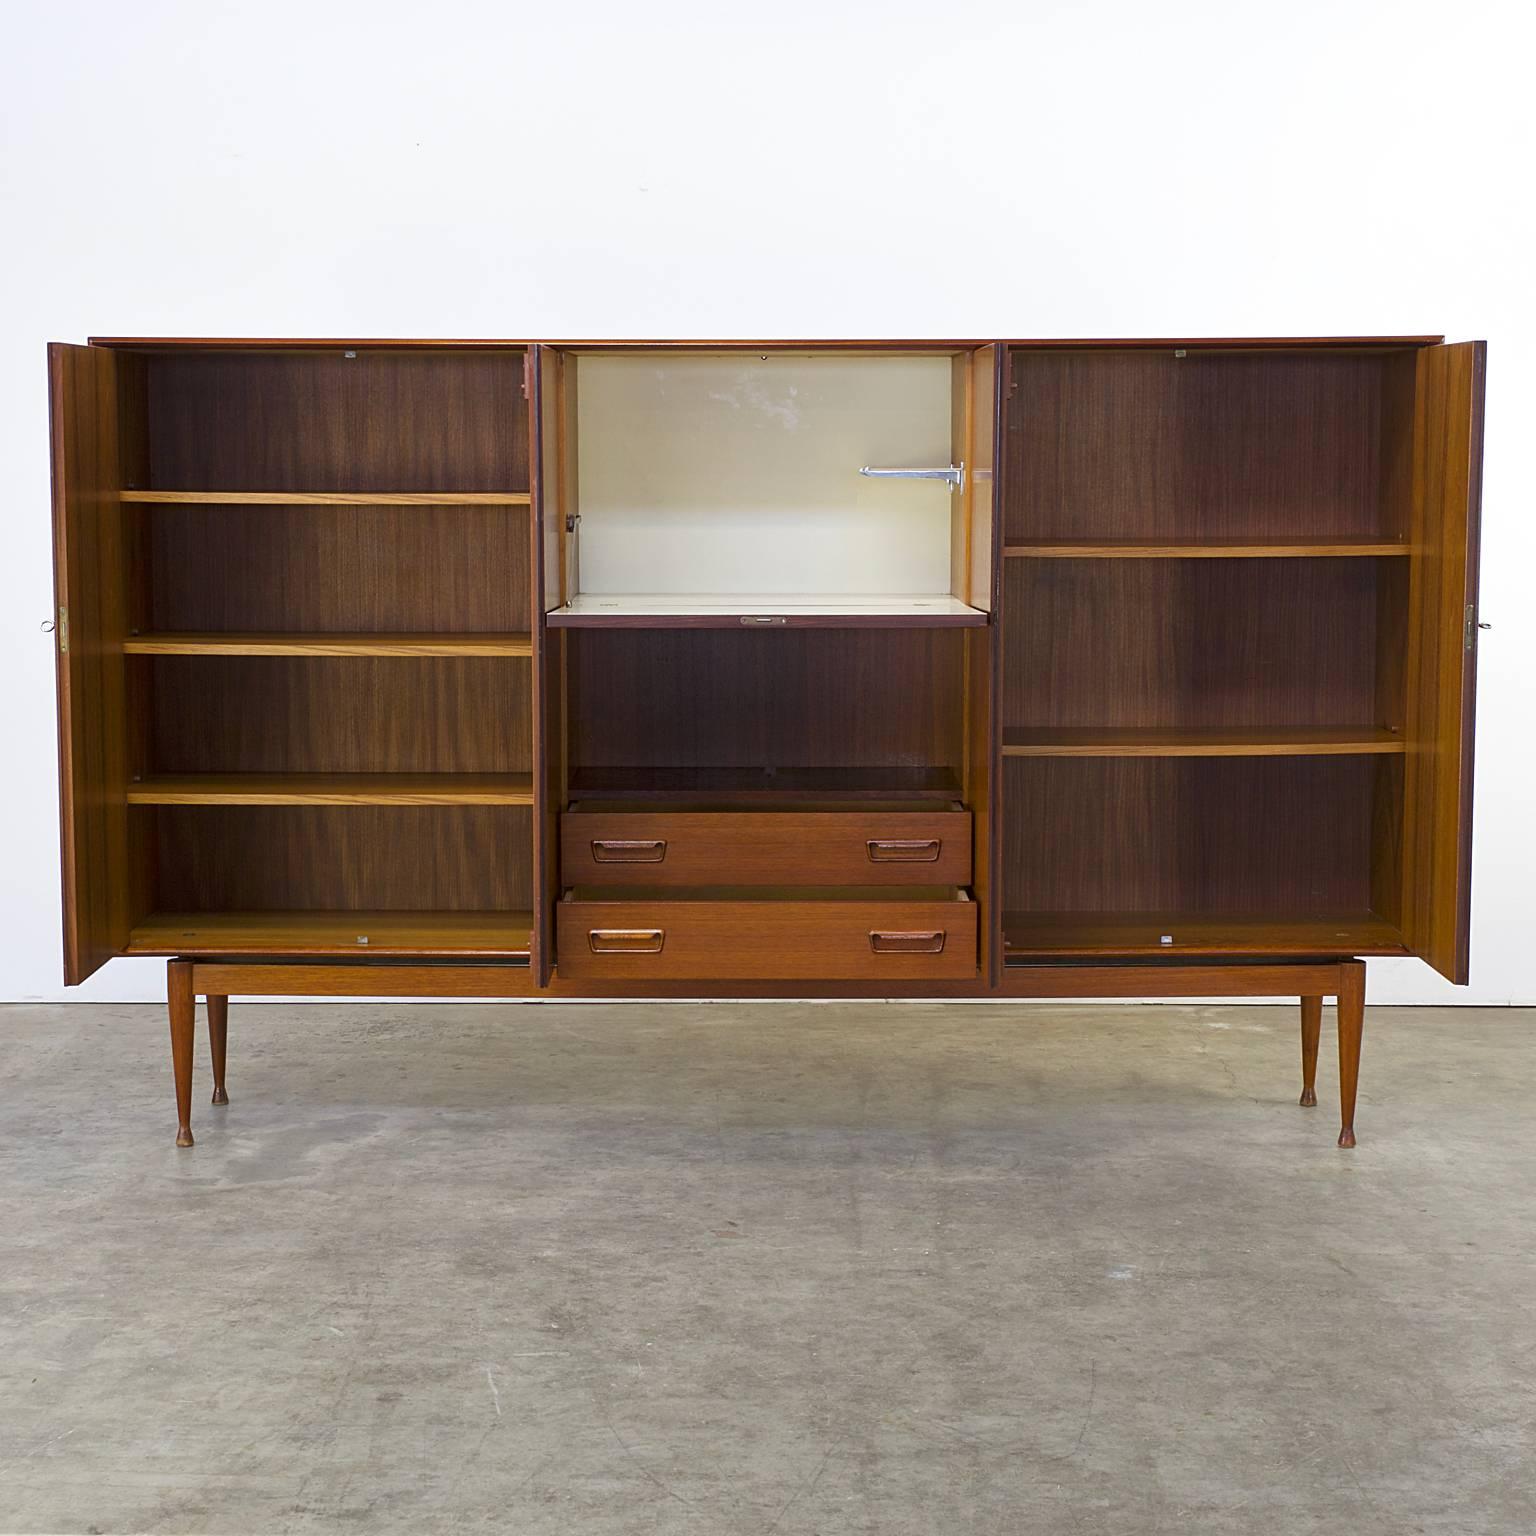 1960s teak cabinet four doors, two drawers, one flapdoor attributed Arne Wahl Iversen for Vinde Mobelfabrik, Denmark. Teak, good condition, wear consistent with age and use, minimal scuffs on one side of the top. Dimensions: 220cm W x 39cm D x 135cm